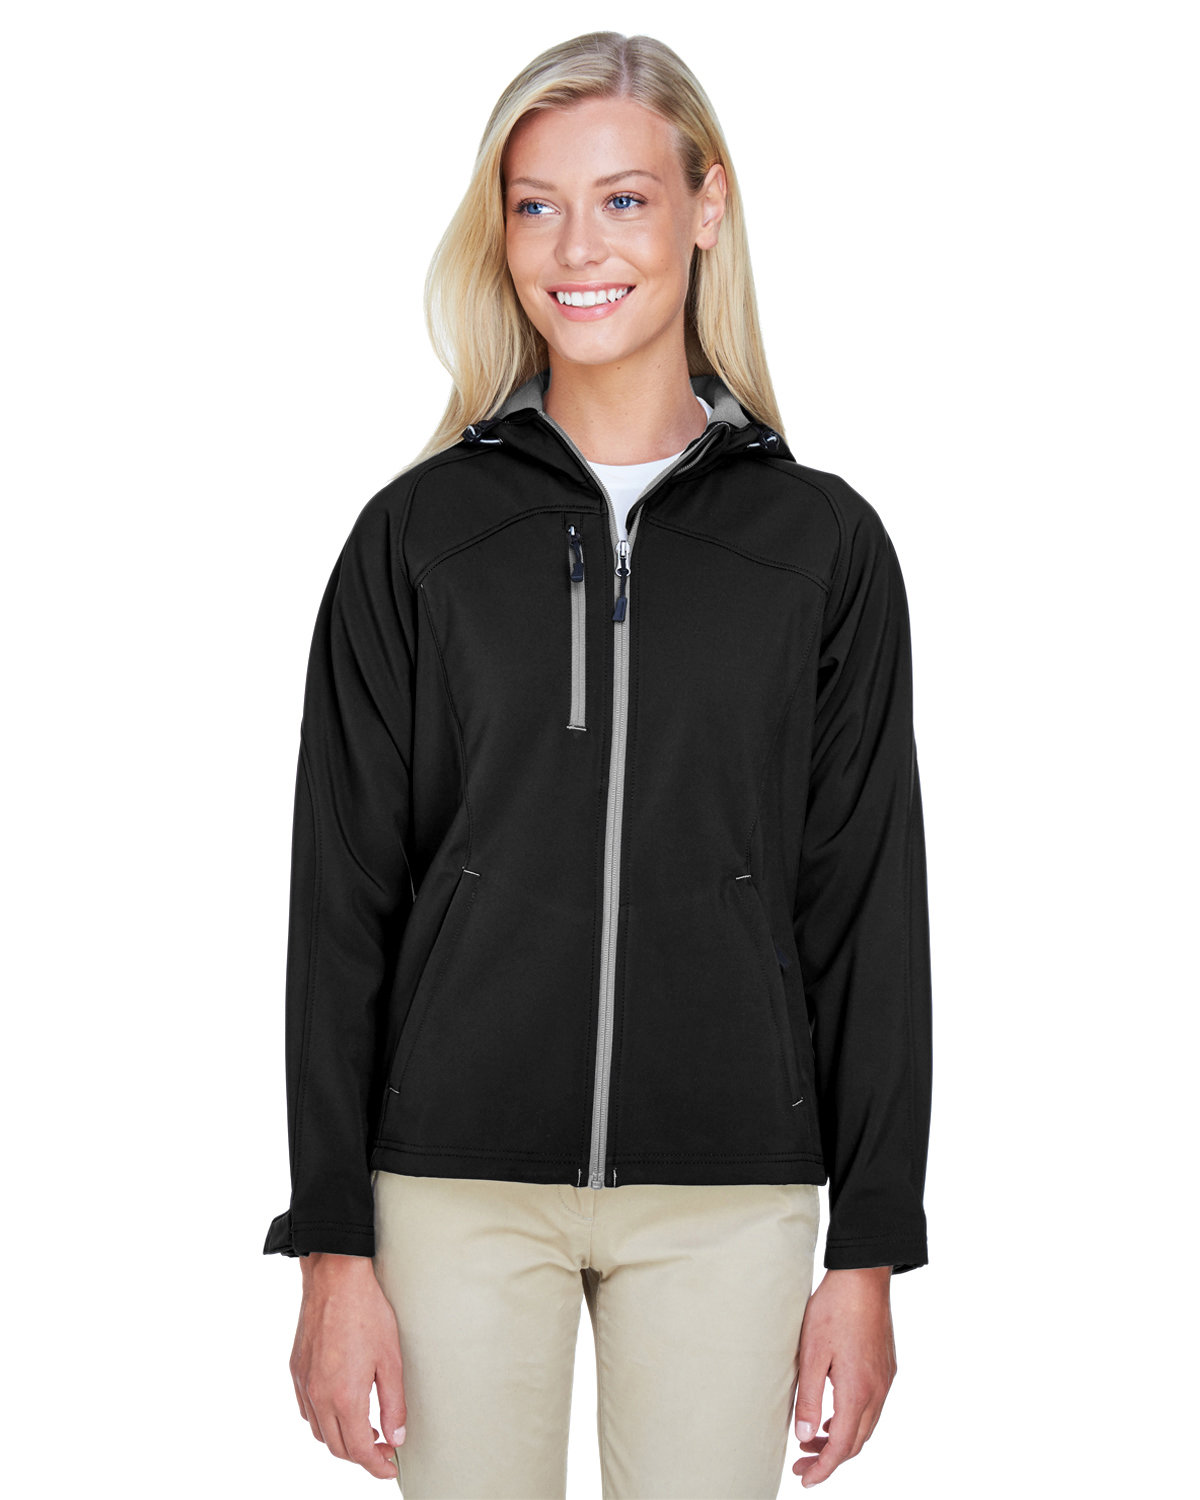 North End Ladies' Prospect Two-Layer Fleece Bonded Soft Shell Hooded Jacket BLACK 